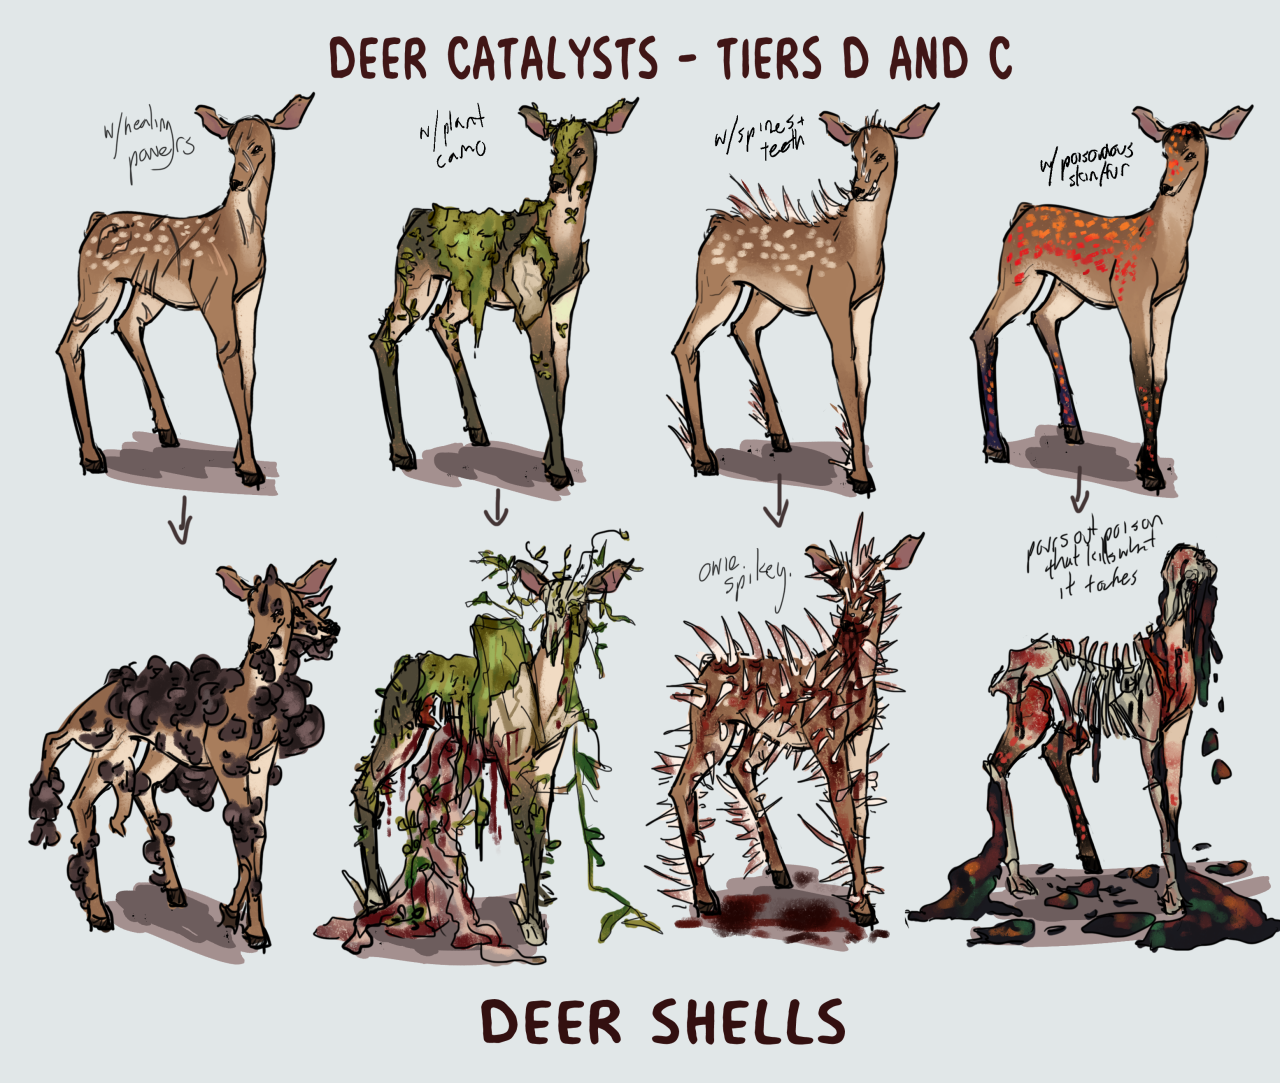 thinking about these fucked up deer concepts i